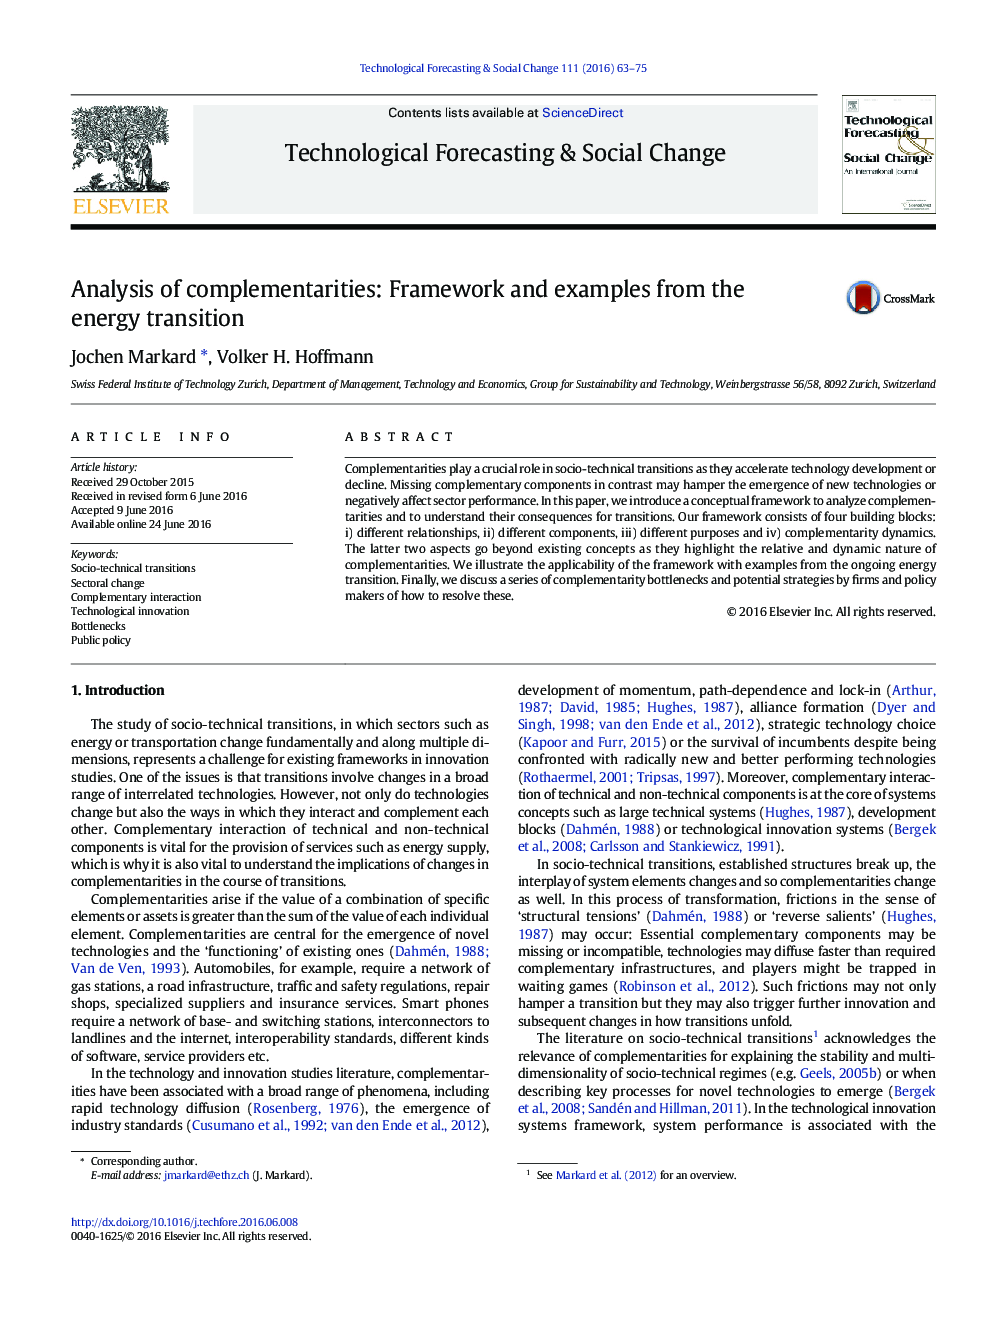 Analysis of complementarities: Framework and examples from the energy transition